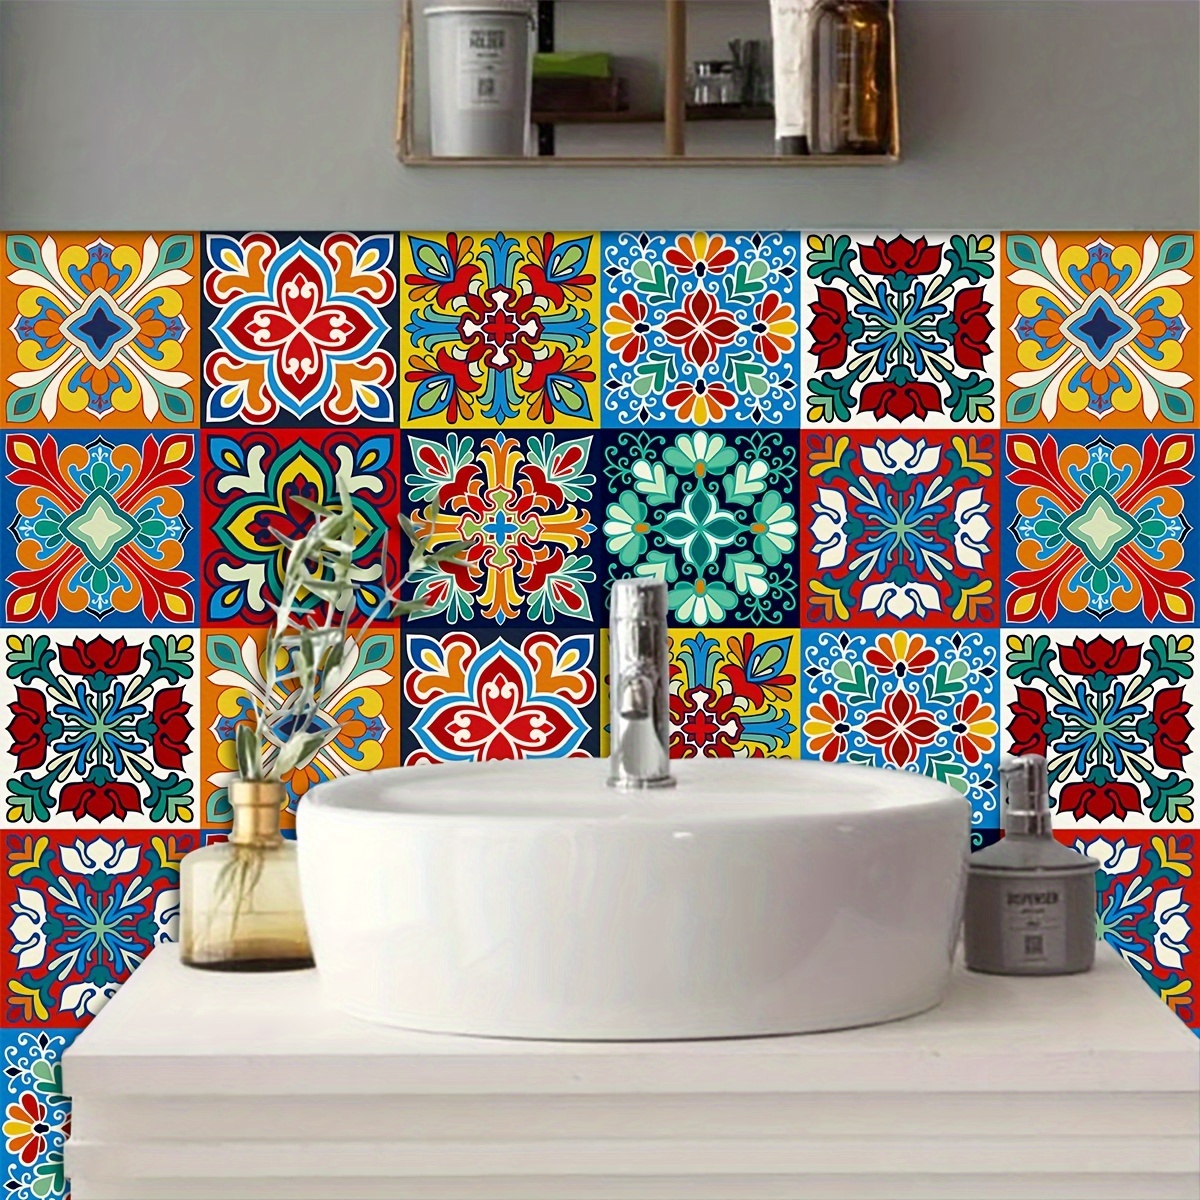 

10pcs/set, Square Colorful Floral Pattern Tile Stickers, Self-adhesive Removable, Oil-proof Waterproof Wall Decals, Vinyl Material, For Home Kitchen Living Room Bathroom Renovation Decor